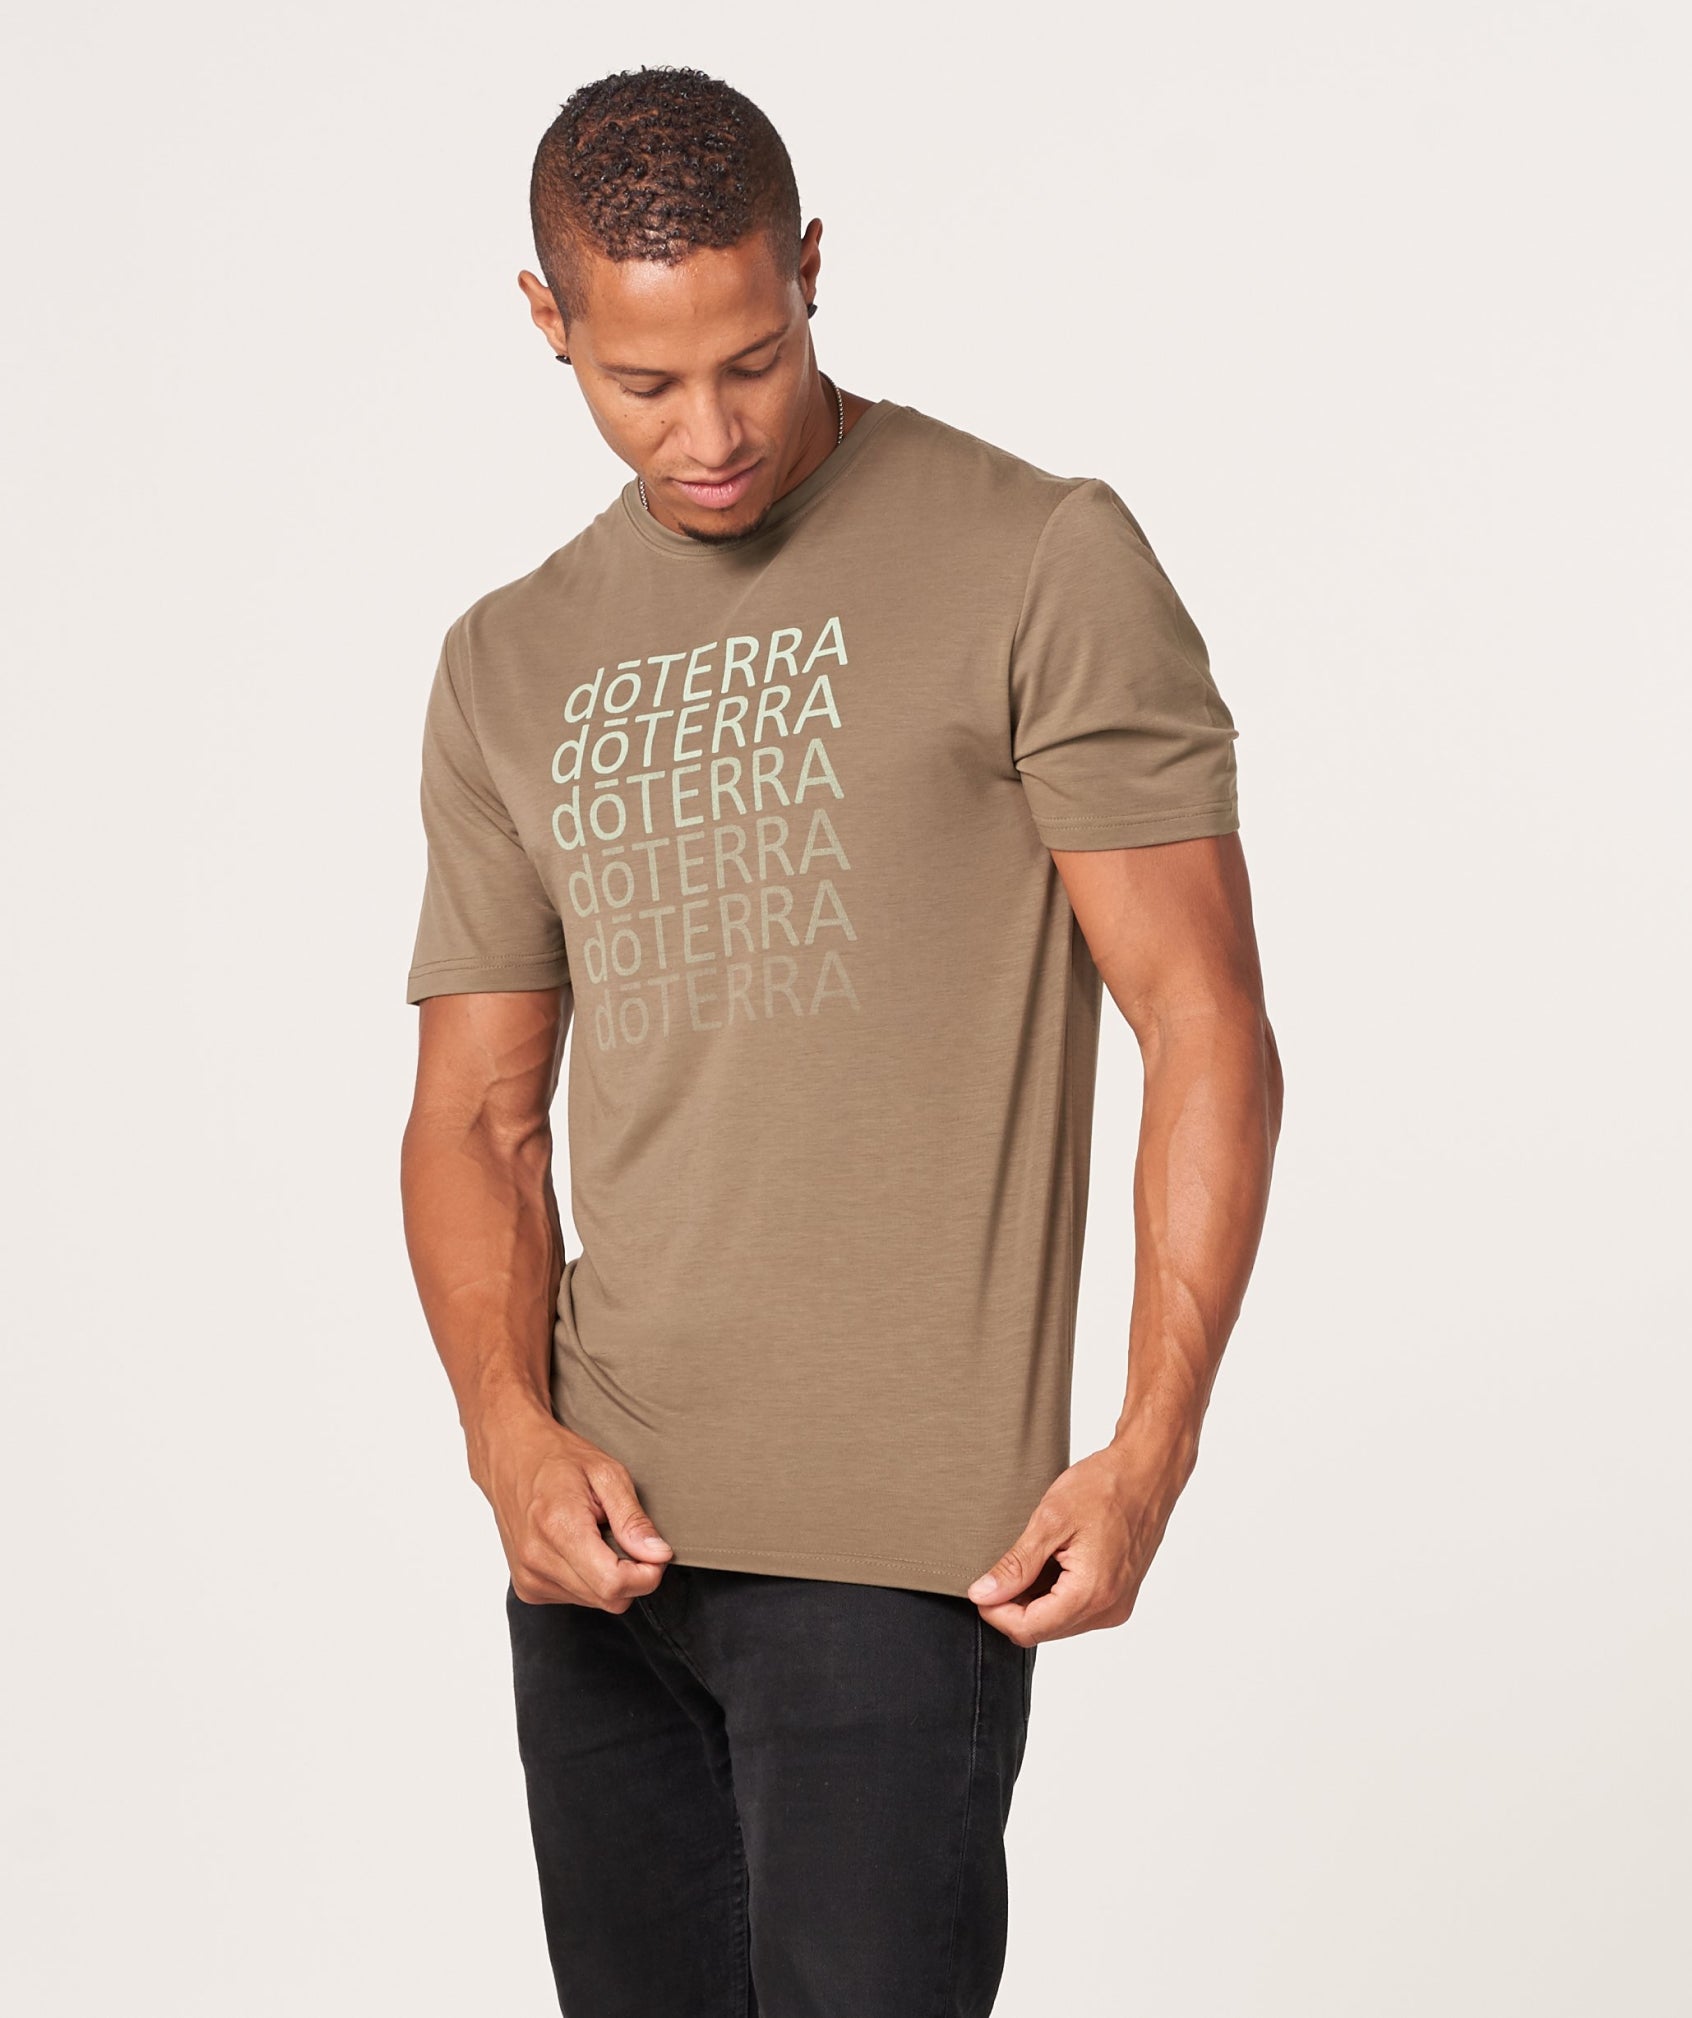 Men's Gift of the Earth Tee